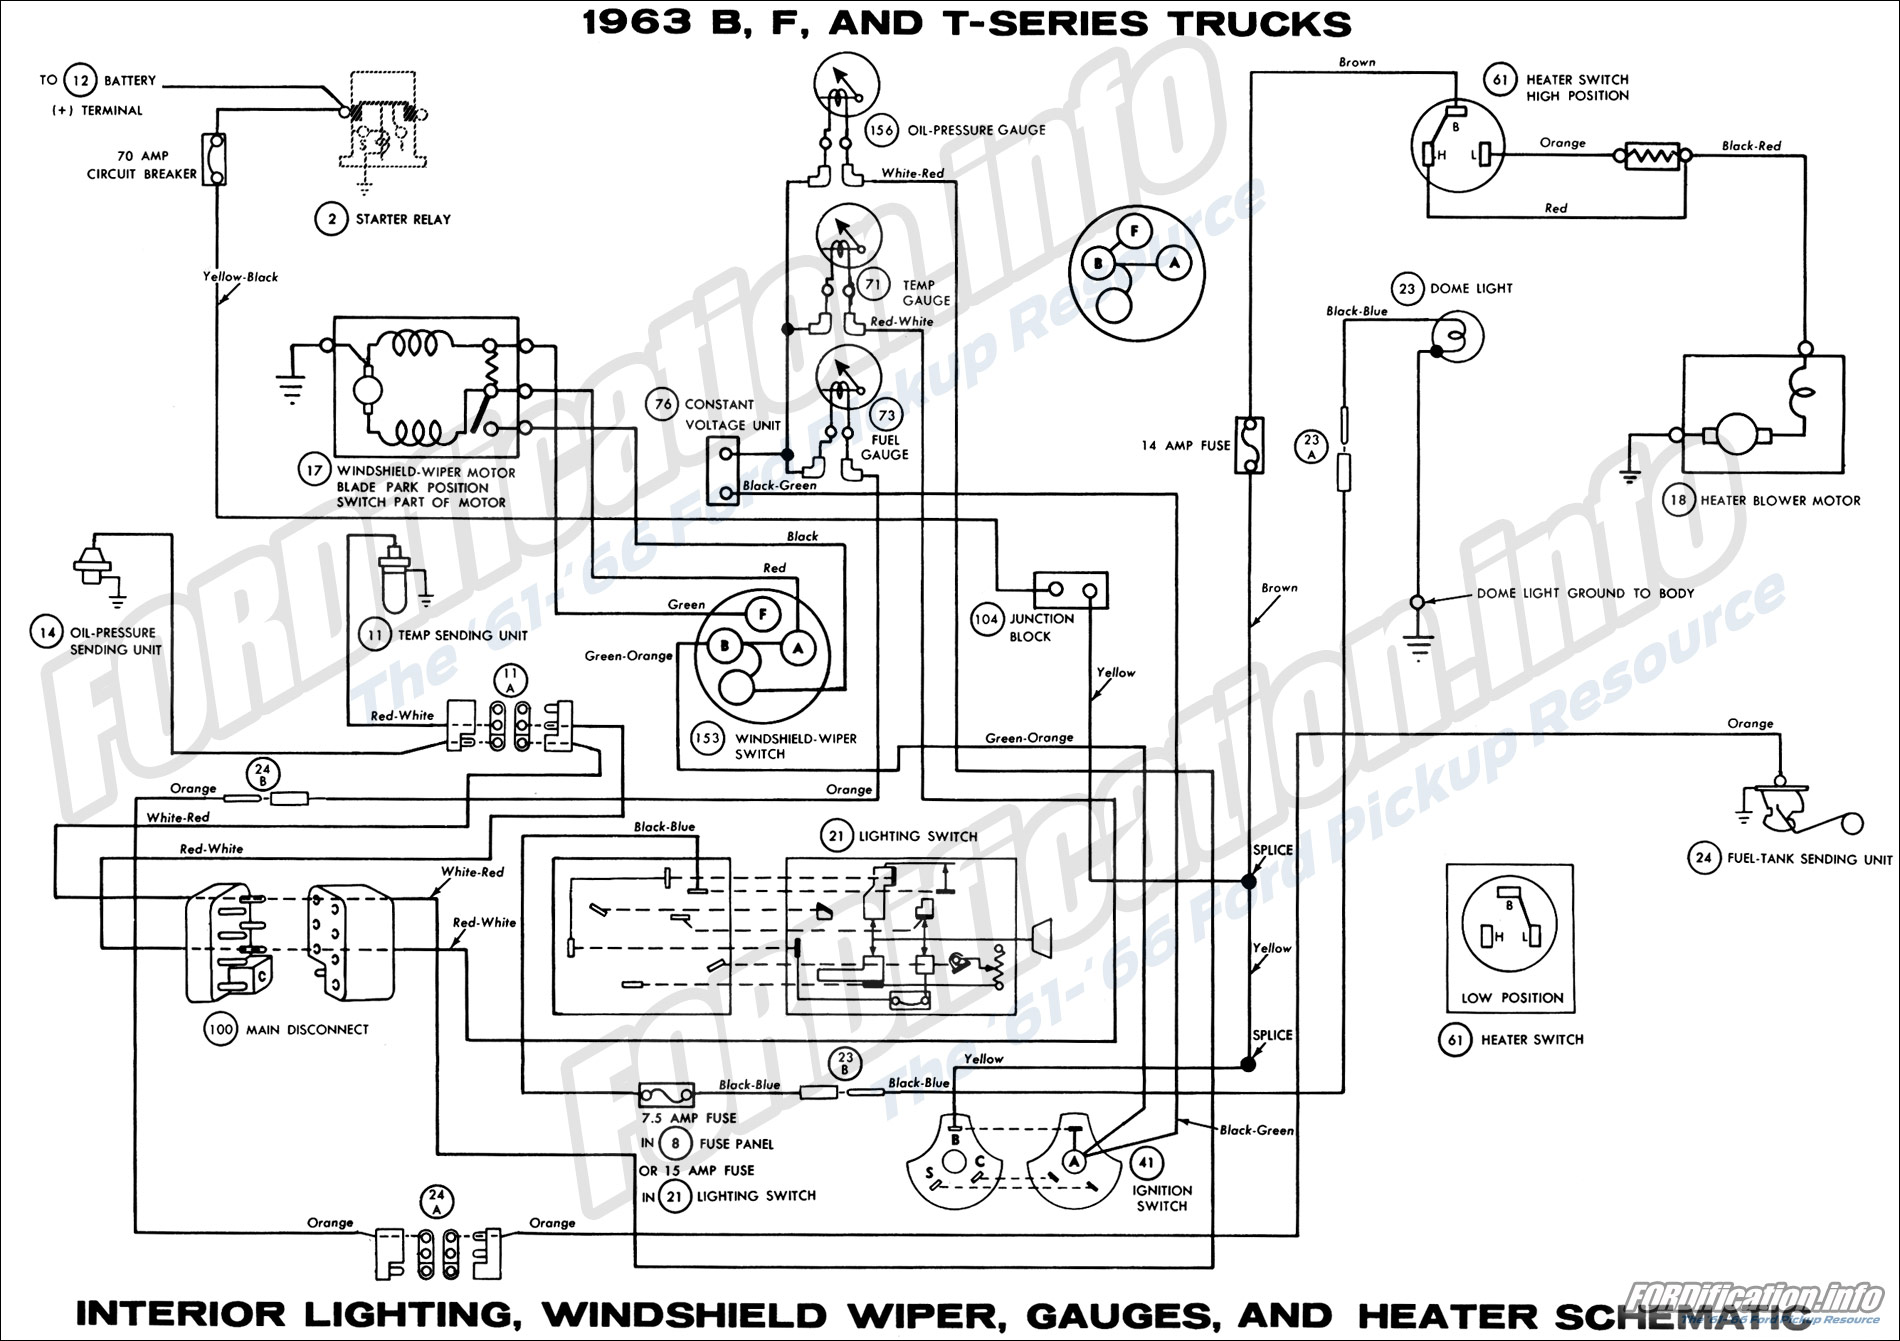 1963 Ford Truck Wiring Diagrams - FORDification.info - The '61-'66 Ford  Pickup Resource Headlight Switch Wiring Diagram FORDification.info